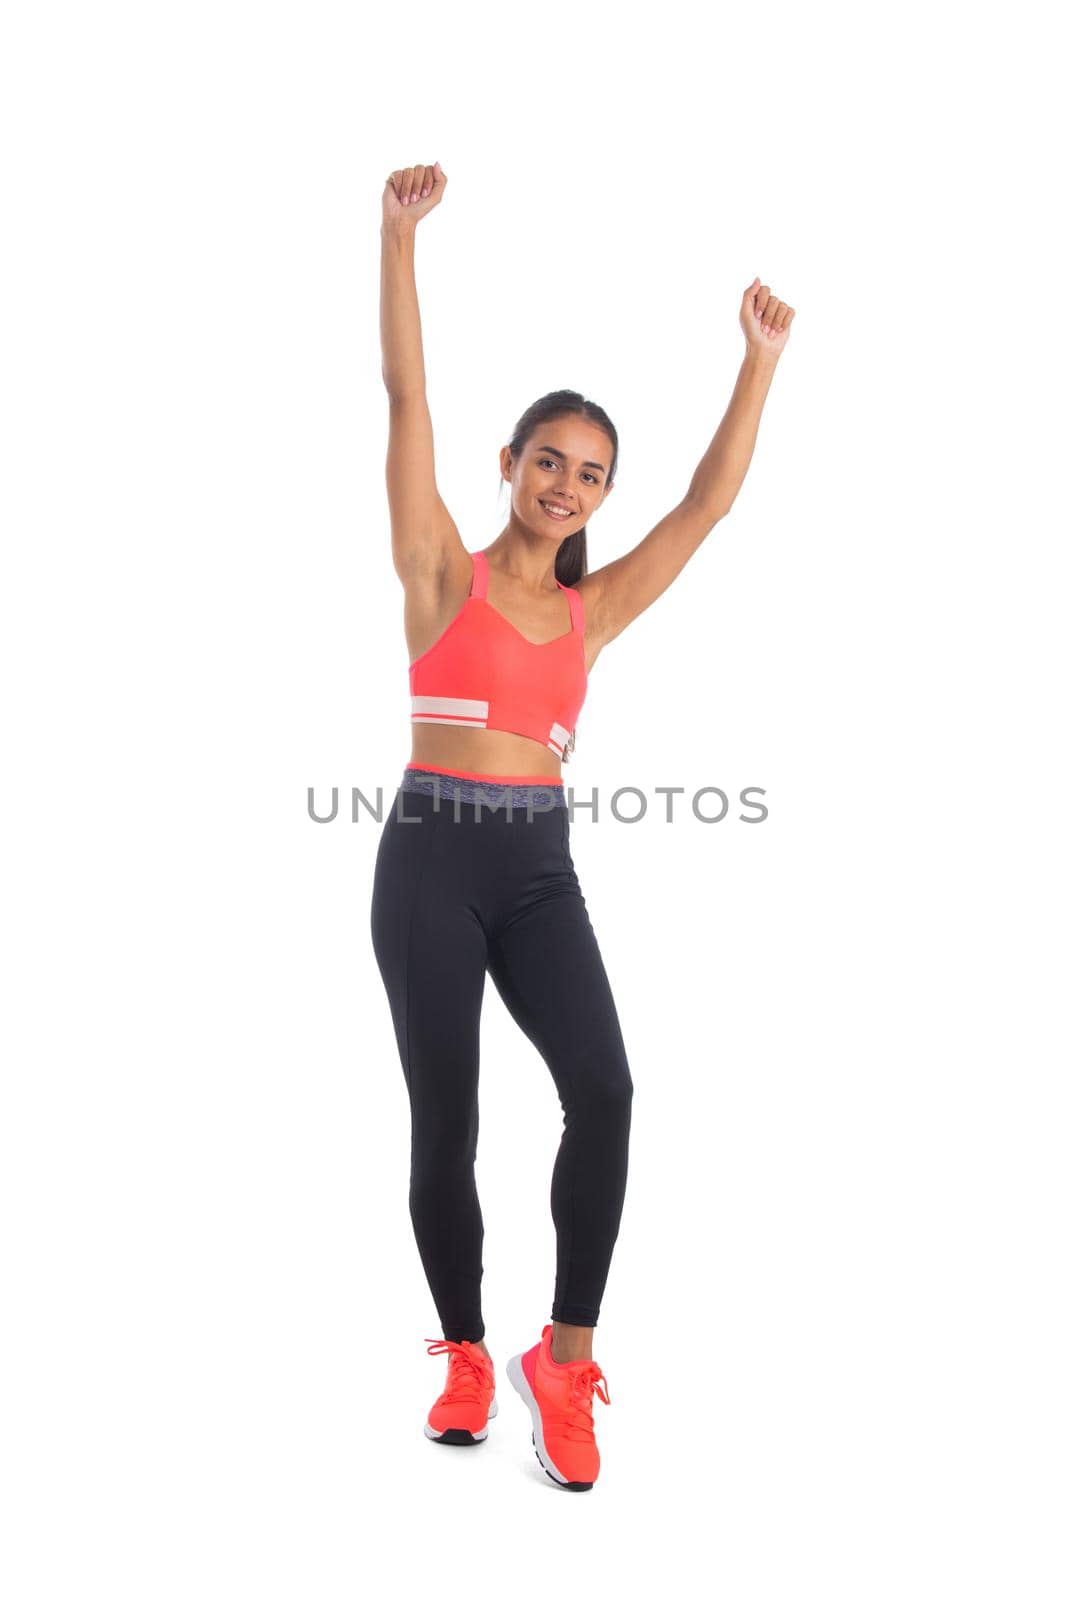 Sport fitness woman excited happy smile hold raised arms hands up, young healthy smile girl perfect body full length portrait isolated over white background